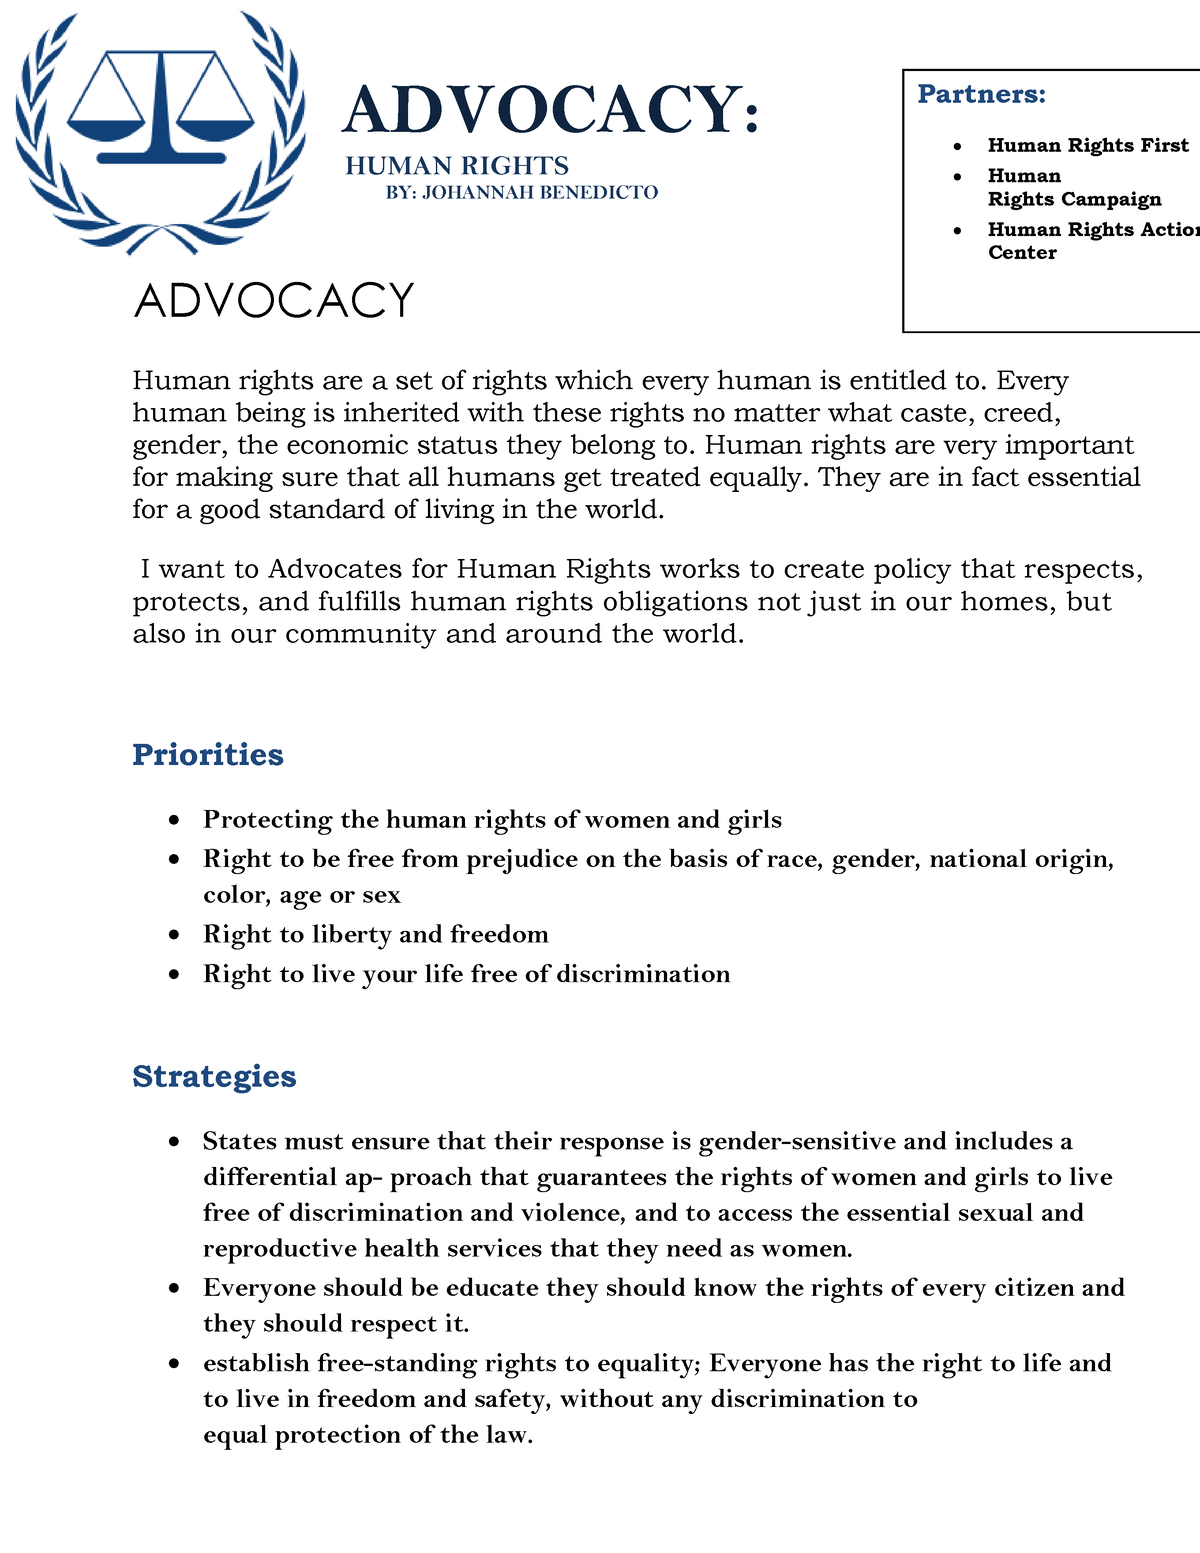 human rights advocacy essay